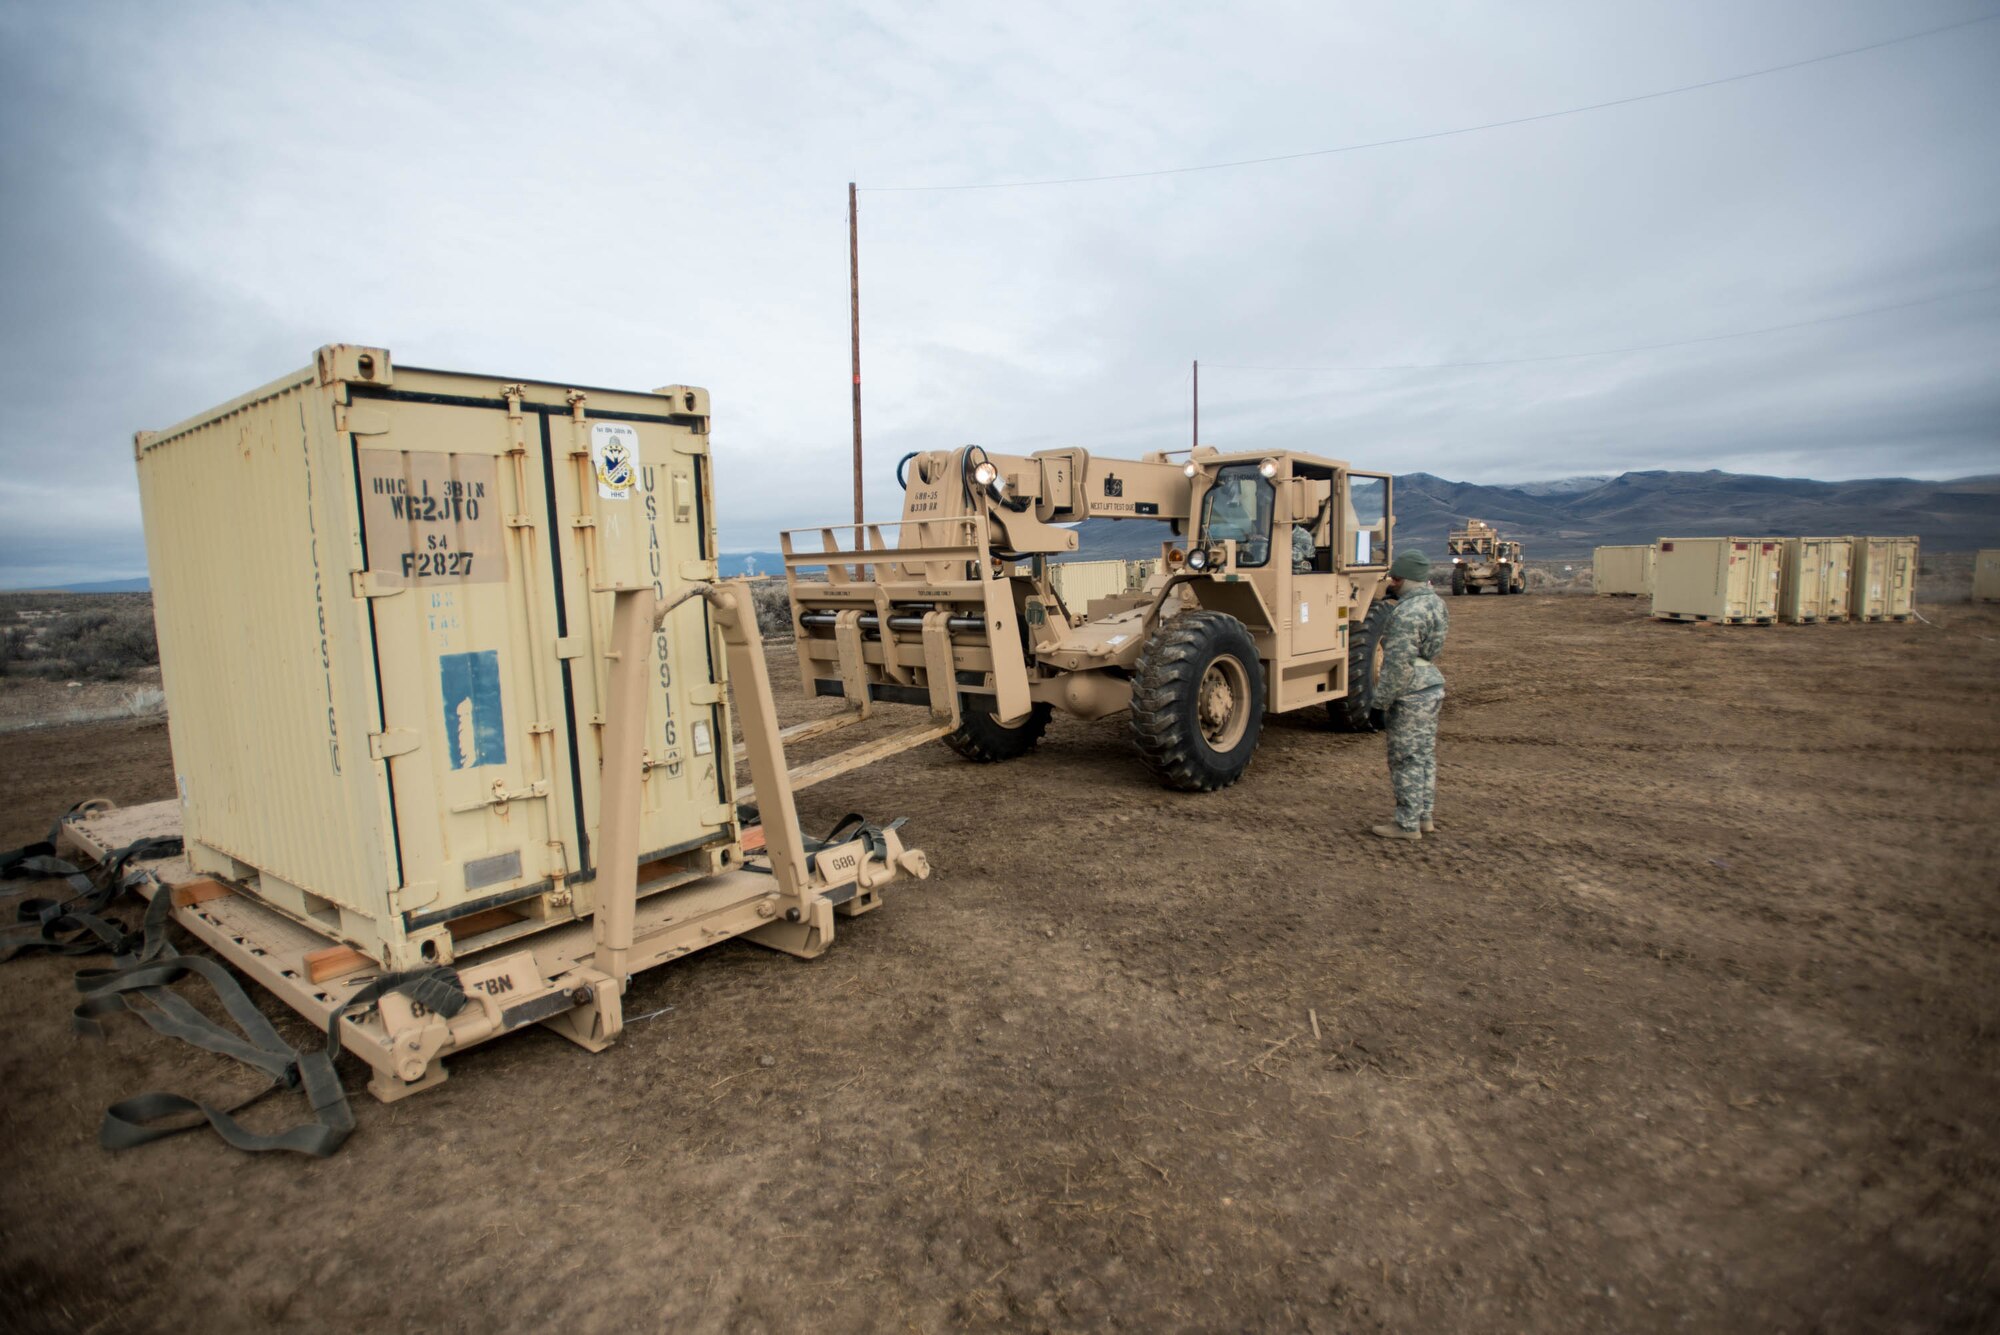 Soldiers from the U.S. Army’s 688th Rapid Port Opening Element move cargo at the forward operating node at Amedee Army Airfield, Calif., on March 9, 2016. The 688th RPOE is working in conjunction with the Kentucky Air National Guard’s 123rd Contingency Response Group and a team from the Defense Logistics Agency to operate Joint Task Force-Port Opening Sangala during a week-long exercise called Operation Lumberjack. The objective of the JTF-PO is to establish an aerial port of debarkation, provide initial distribution capability and set up warehousing for distribution beyond the forward node. (Kentucky Air National Guard photo by Master Sgt. Phil Speck)